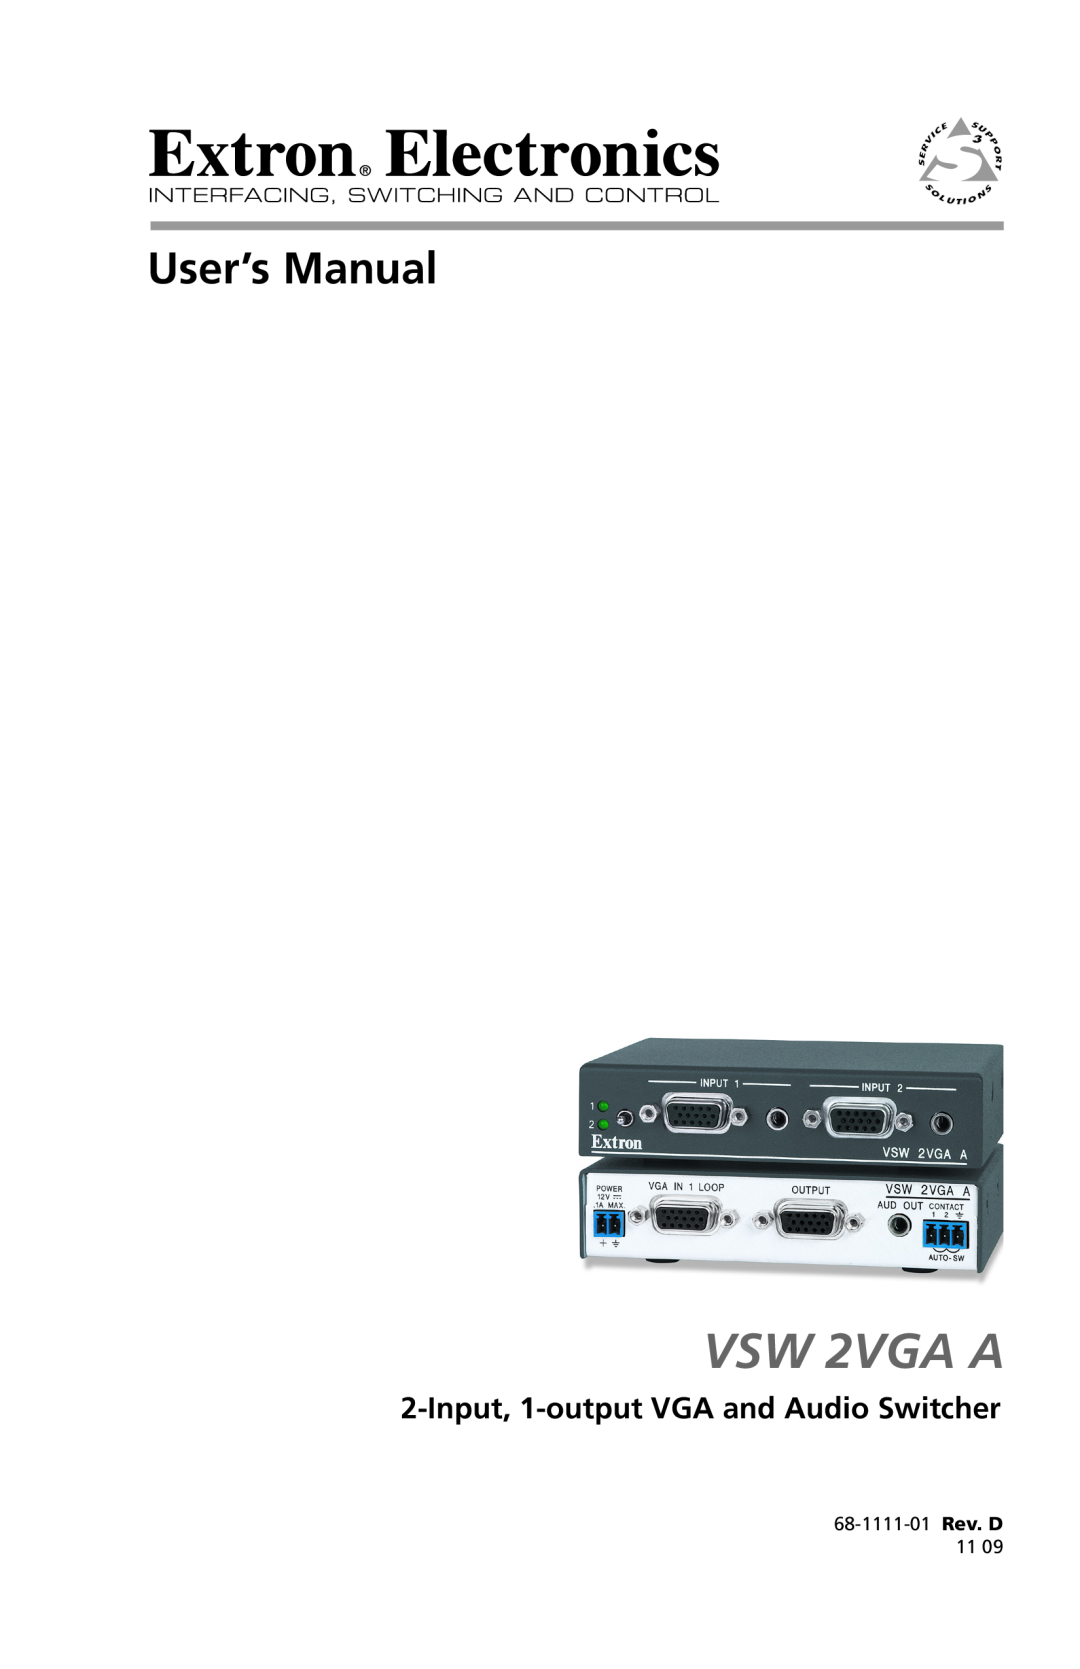 Extron electronic VSW 2VGA A specifications Features, Description, Specifications, Model 